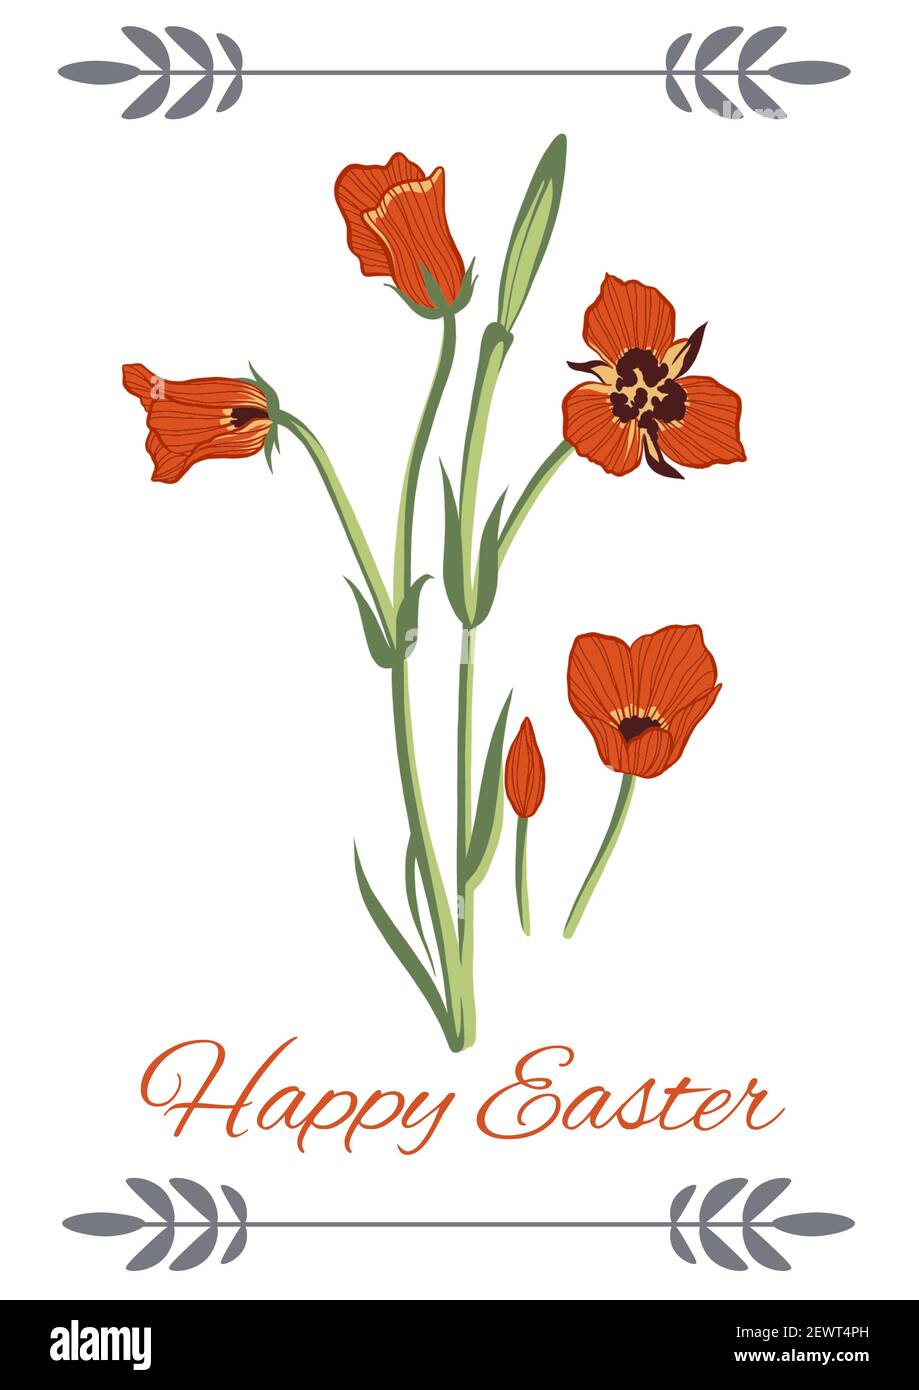 Happy easter text with red flowers on white background Stock Photo